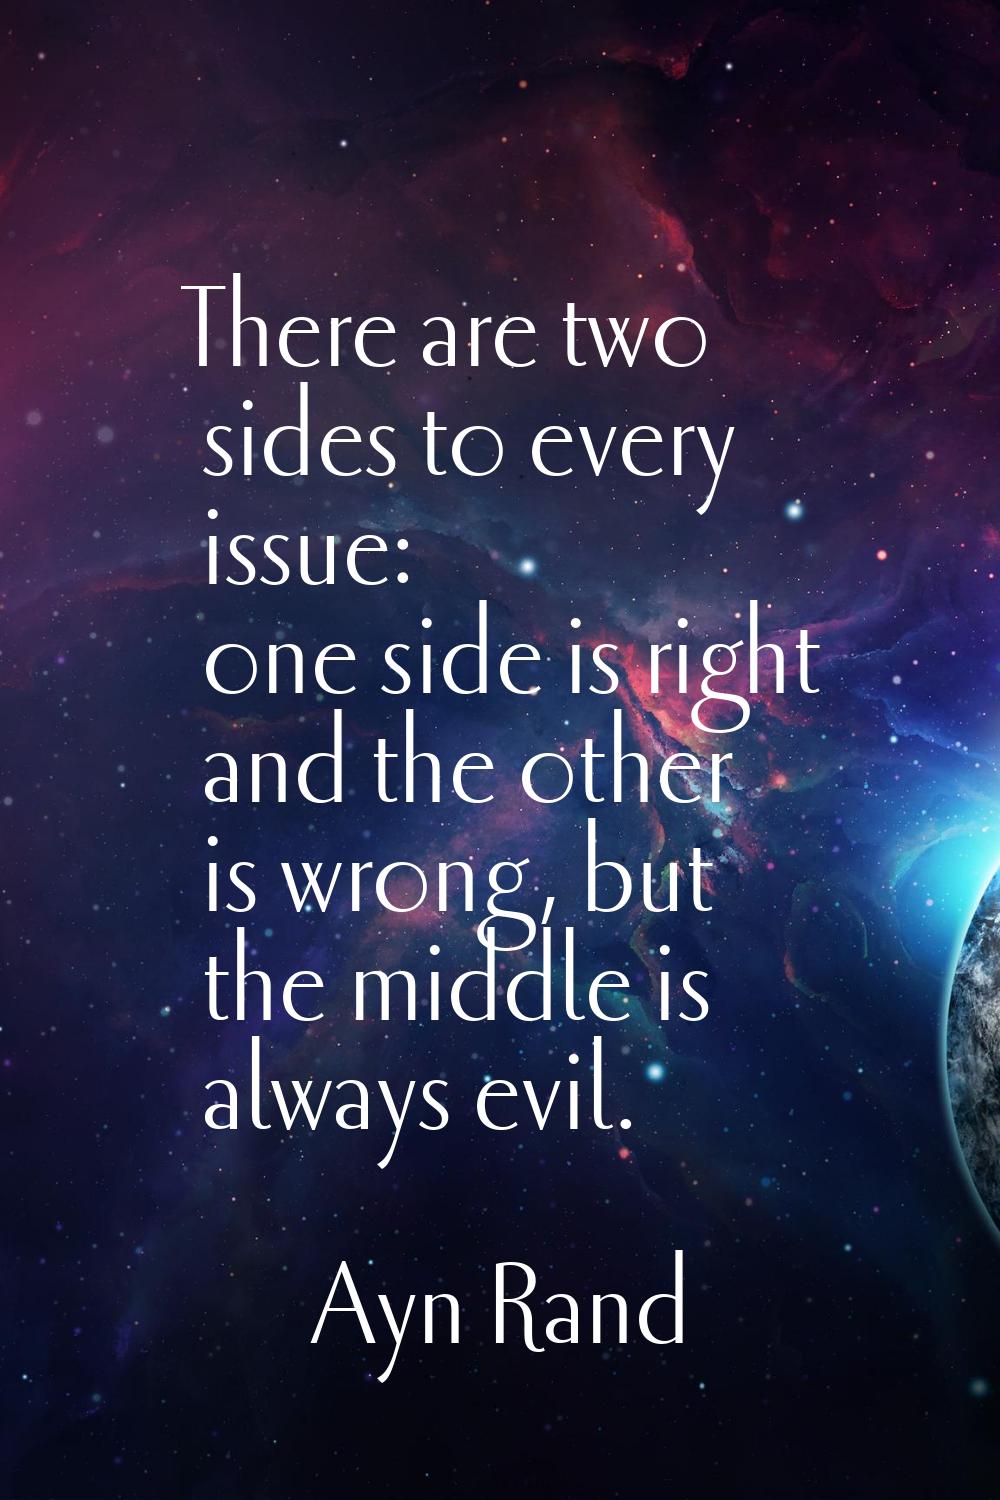 There are two sides to every issue: one side is right and the other is wrong, but the middle is alw